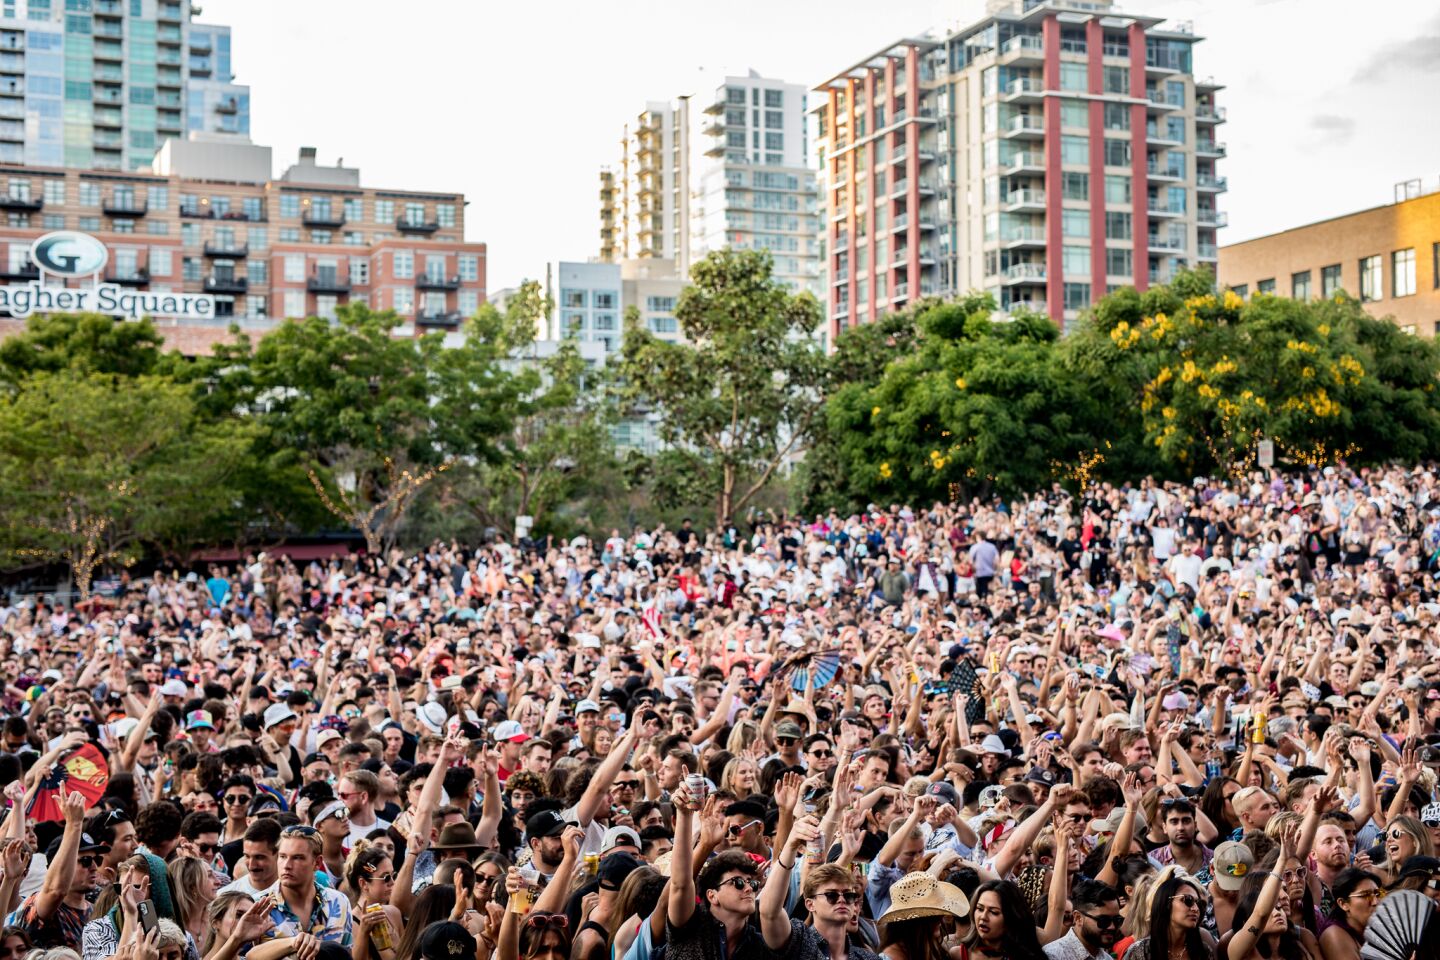 Some San Diegans celebrated their independence at Petco Park for the sold out Black Book in the Park with headliner Chris Lake on Sunday, July 4, 2021.